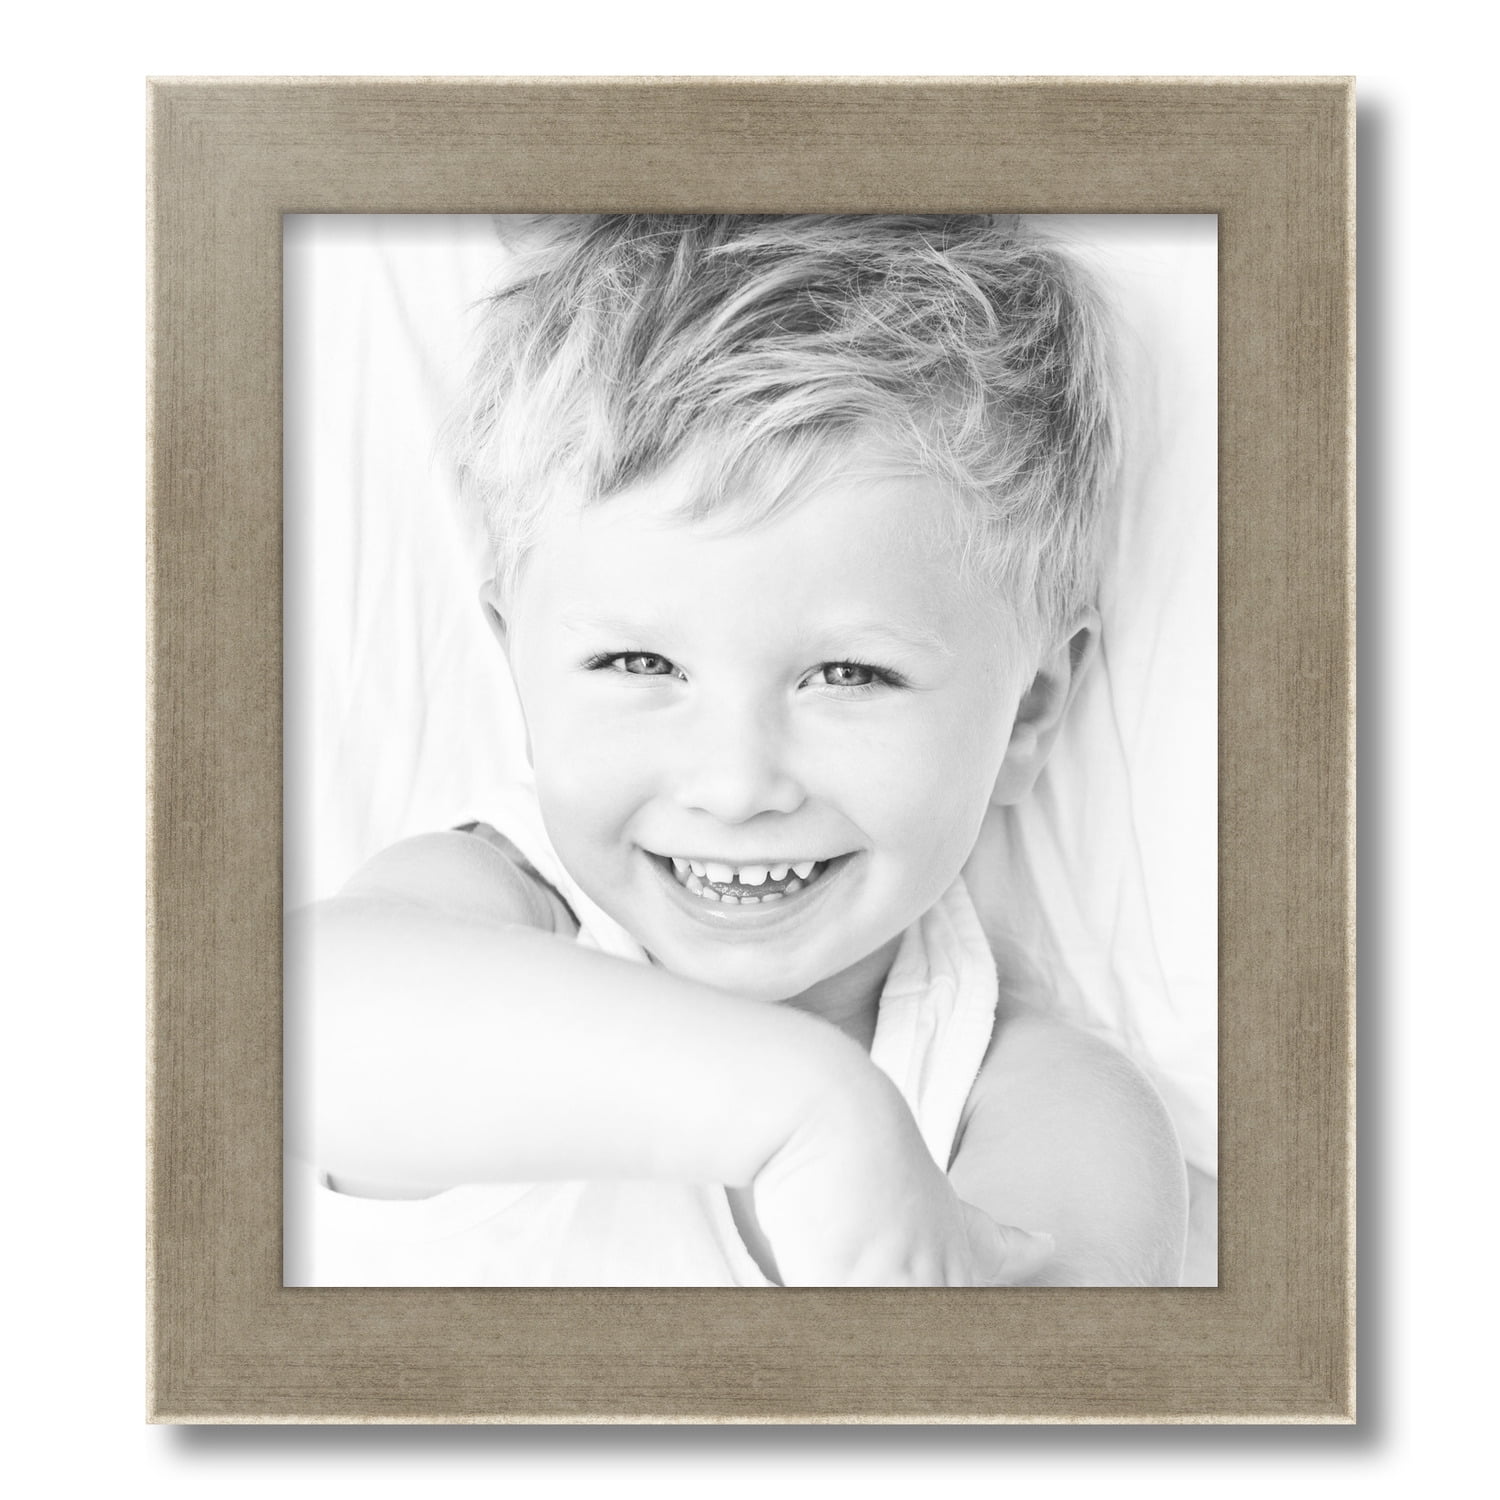 4×6-inch 2-14 Opening White Picture Frame